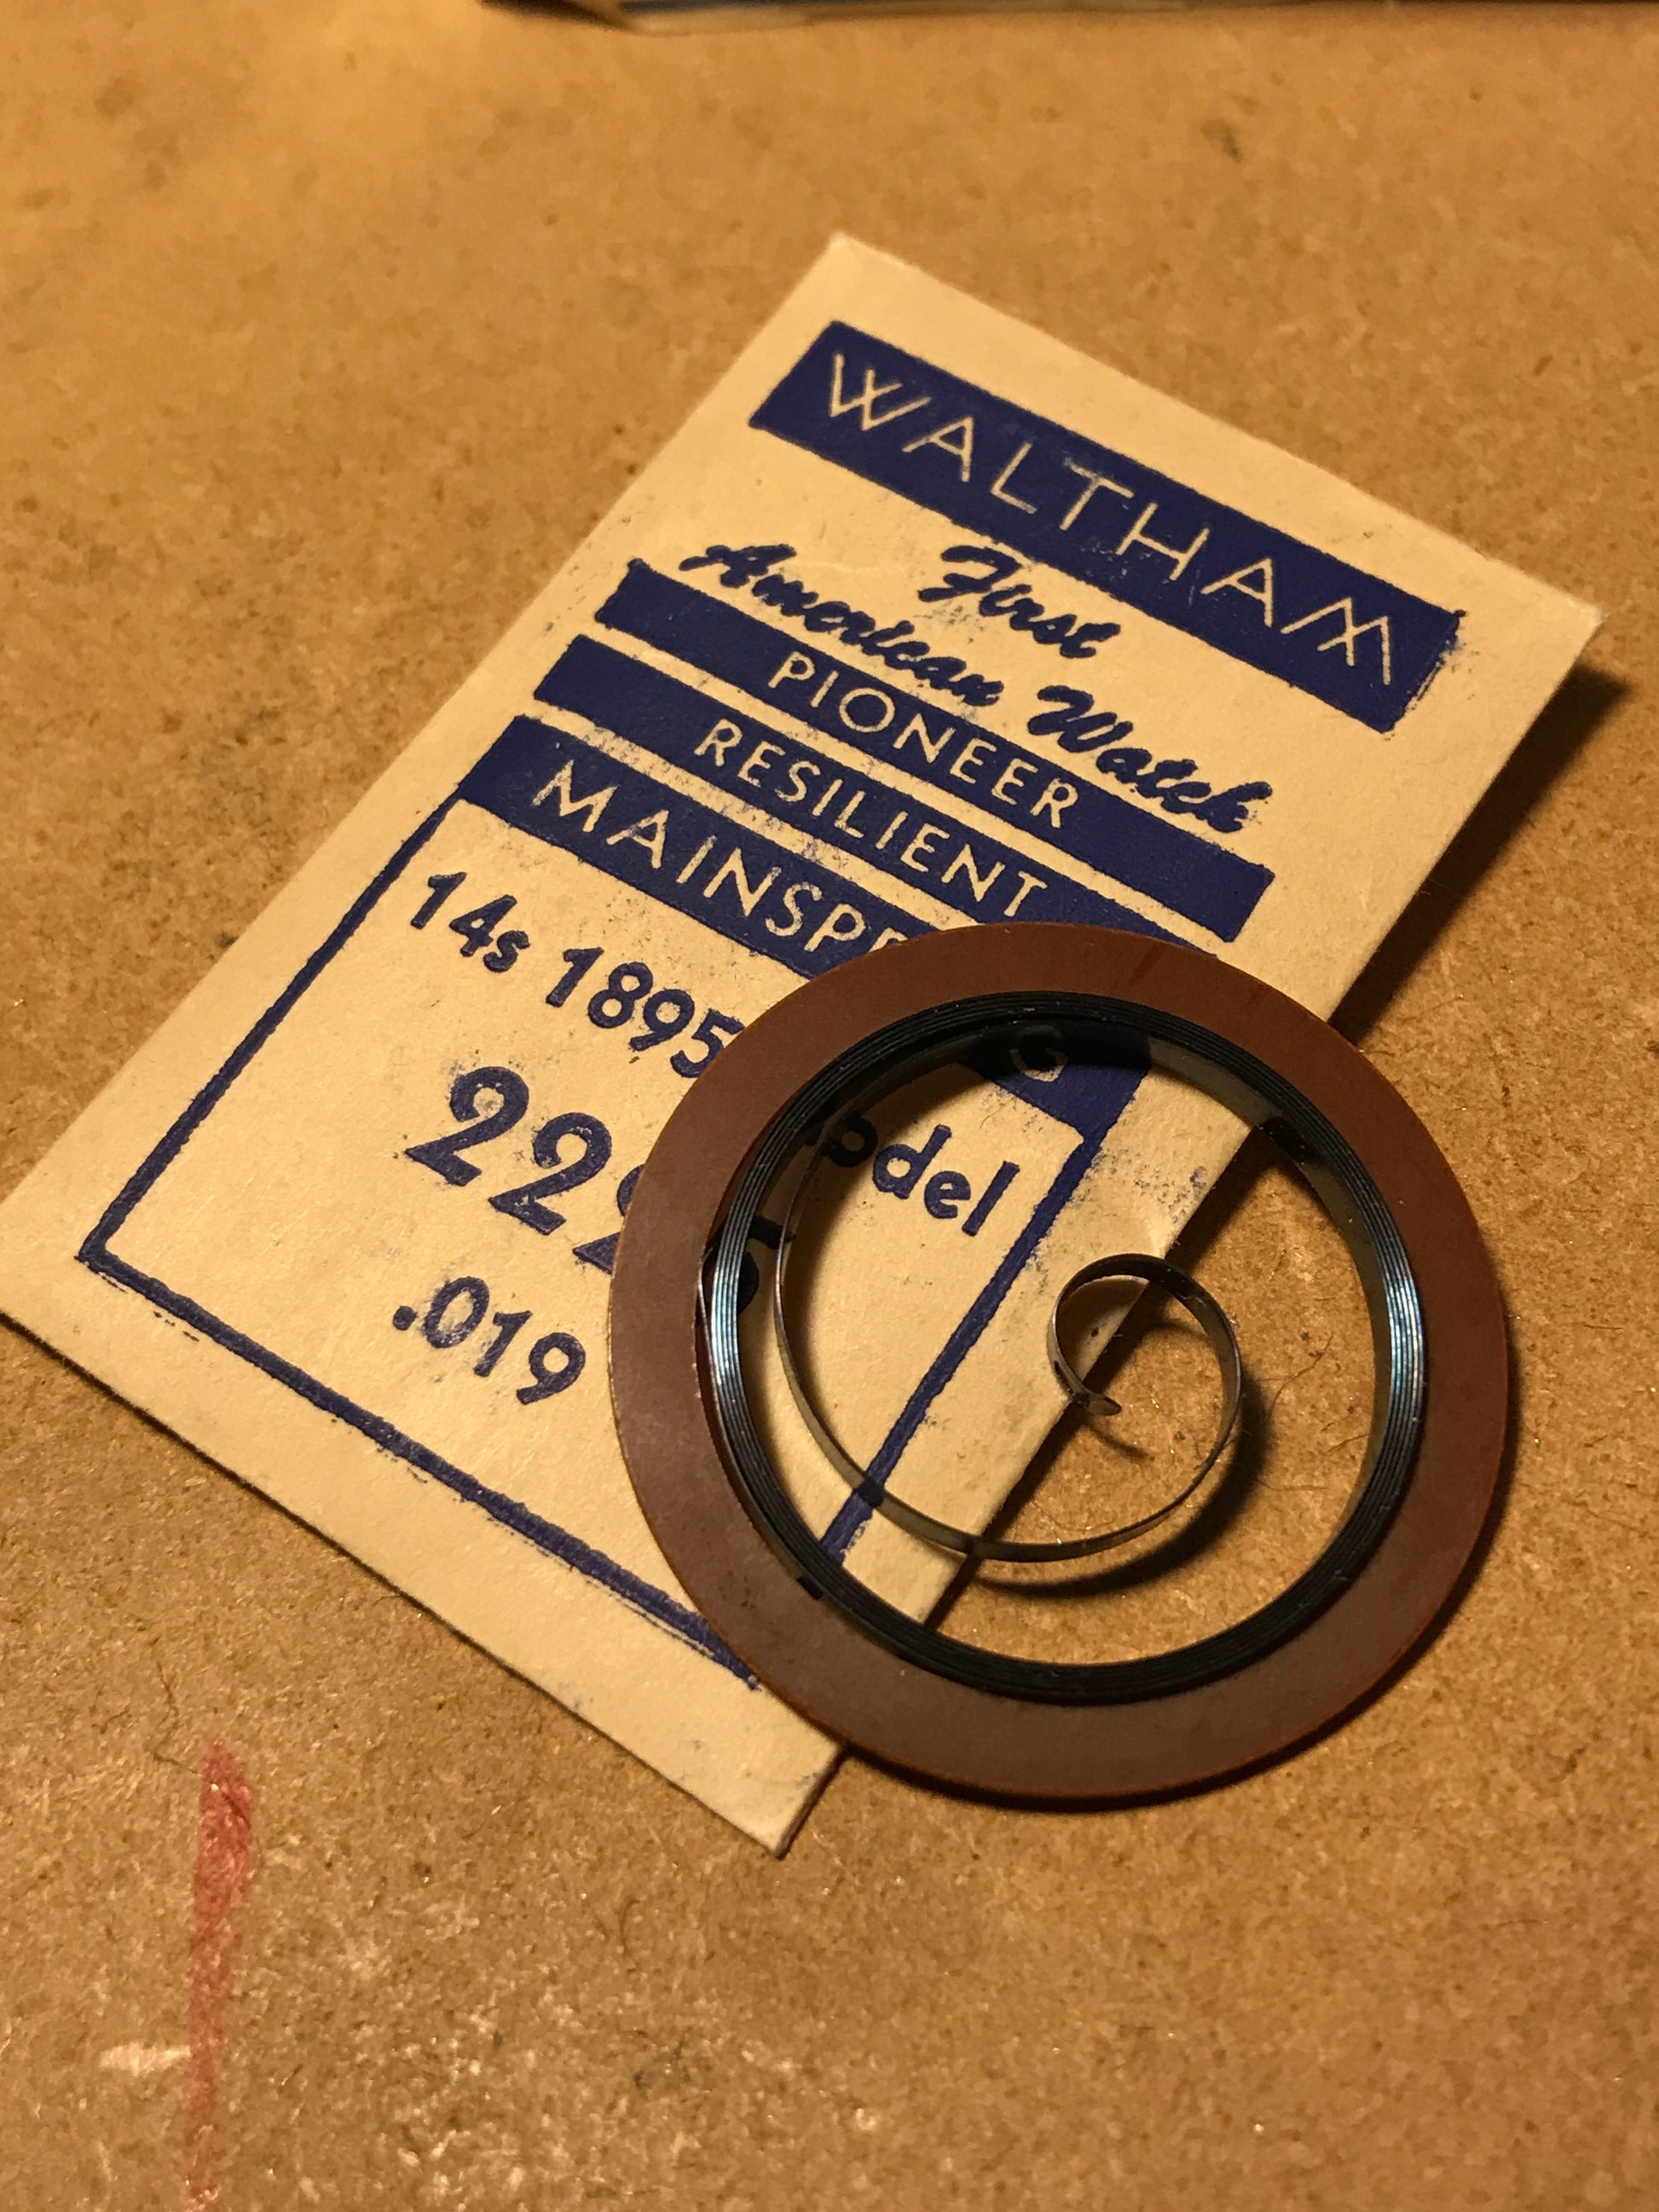 Waltham 14s Factory Mainspring # 2225 for Model 1895 - Steel